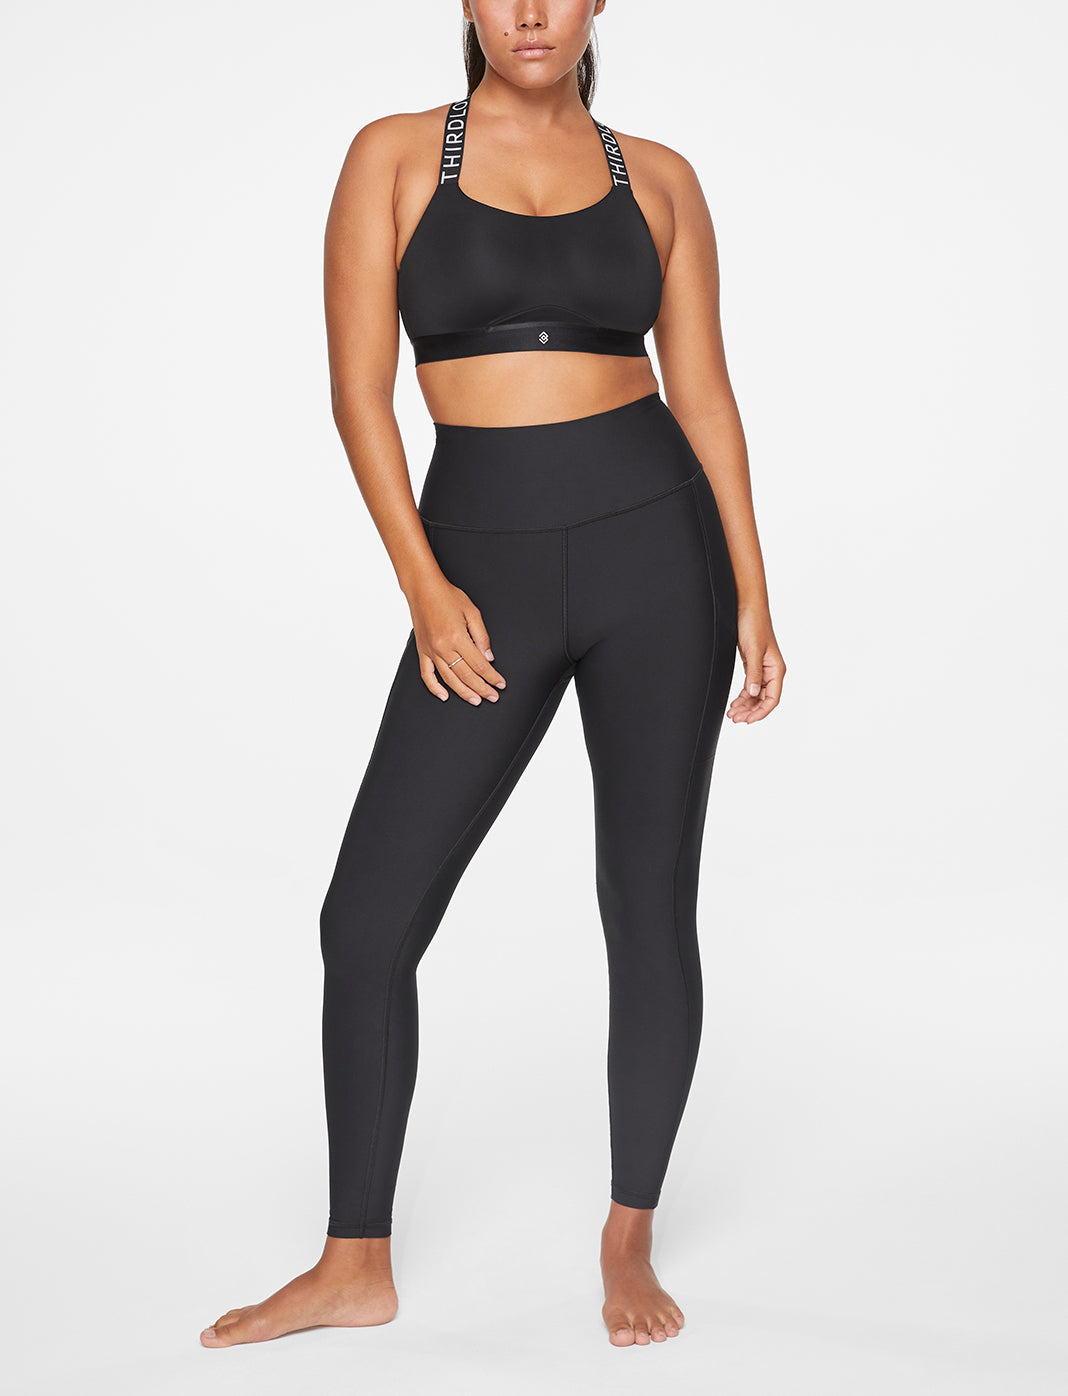 Plus-Size Legging Ad Uses Small Model In One Pant Leg